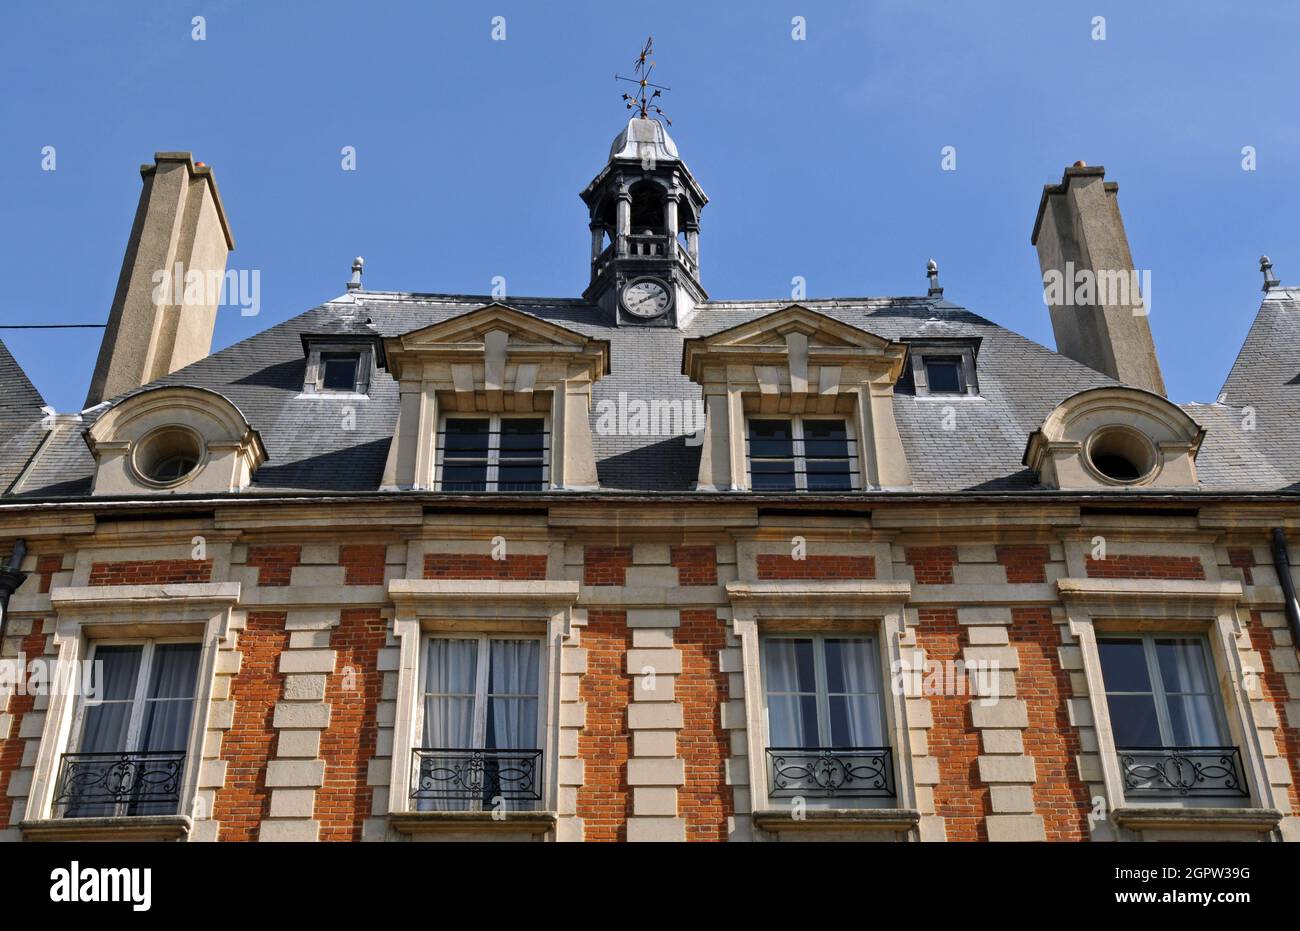 Detail of one of the pavilions fronting onto historic Place des Vosges in the Marais district in Paris. Grand residences line the public square. Stock Photo